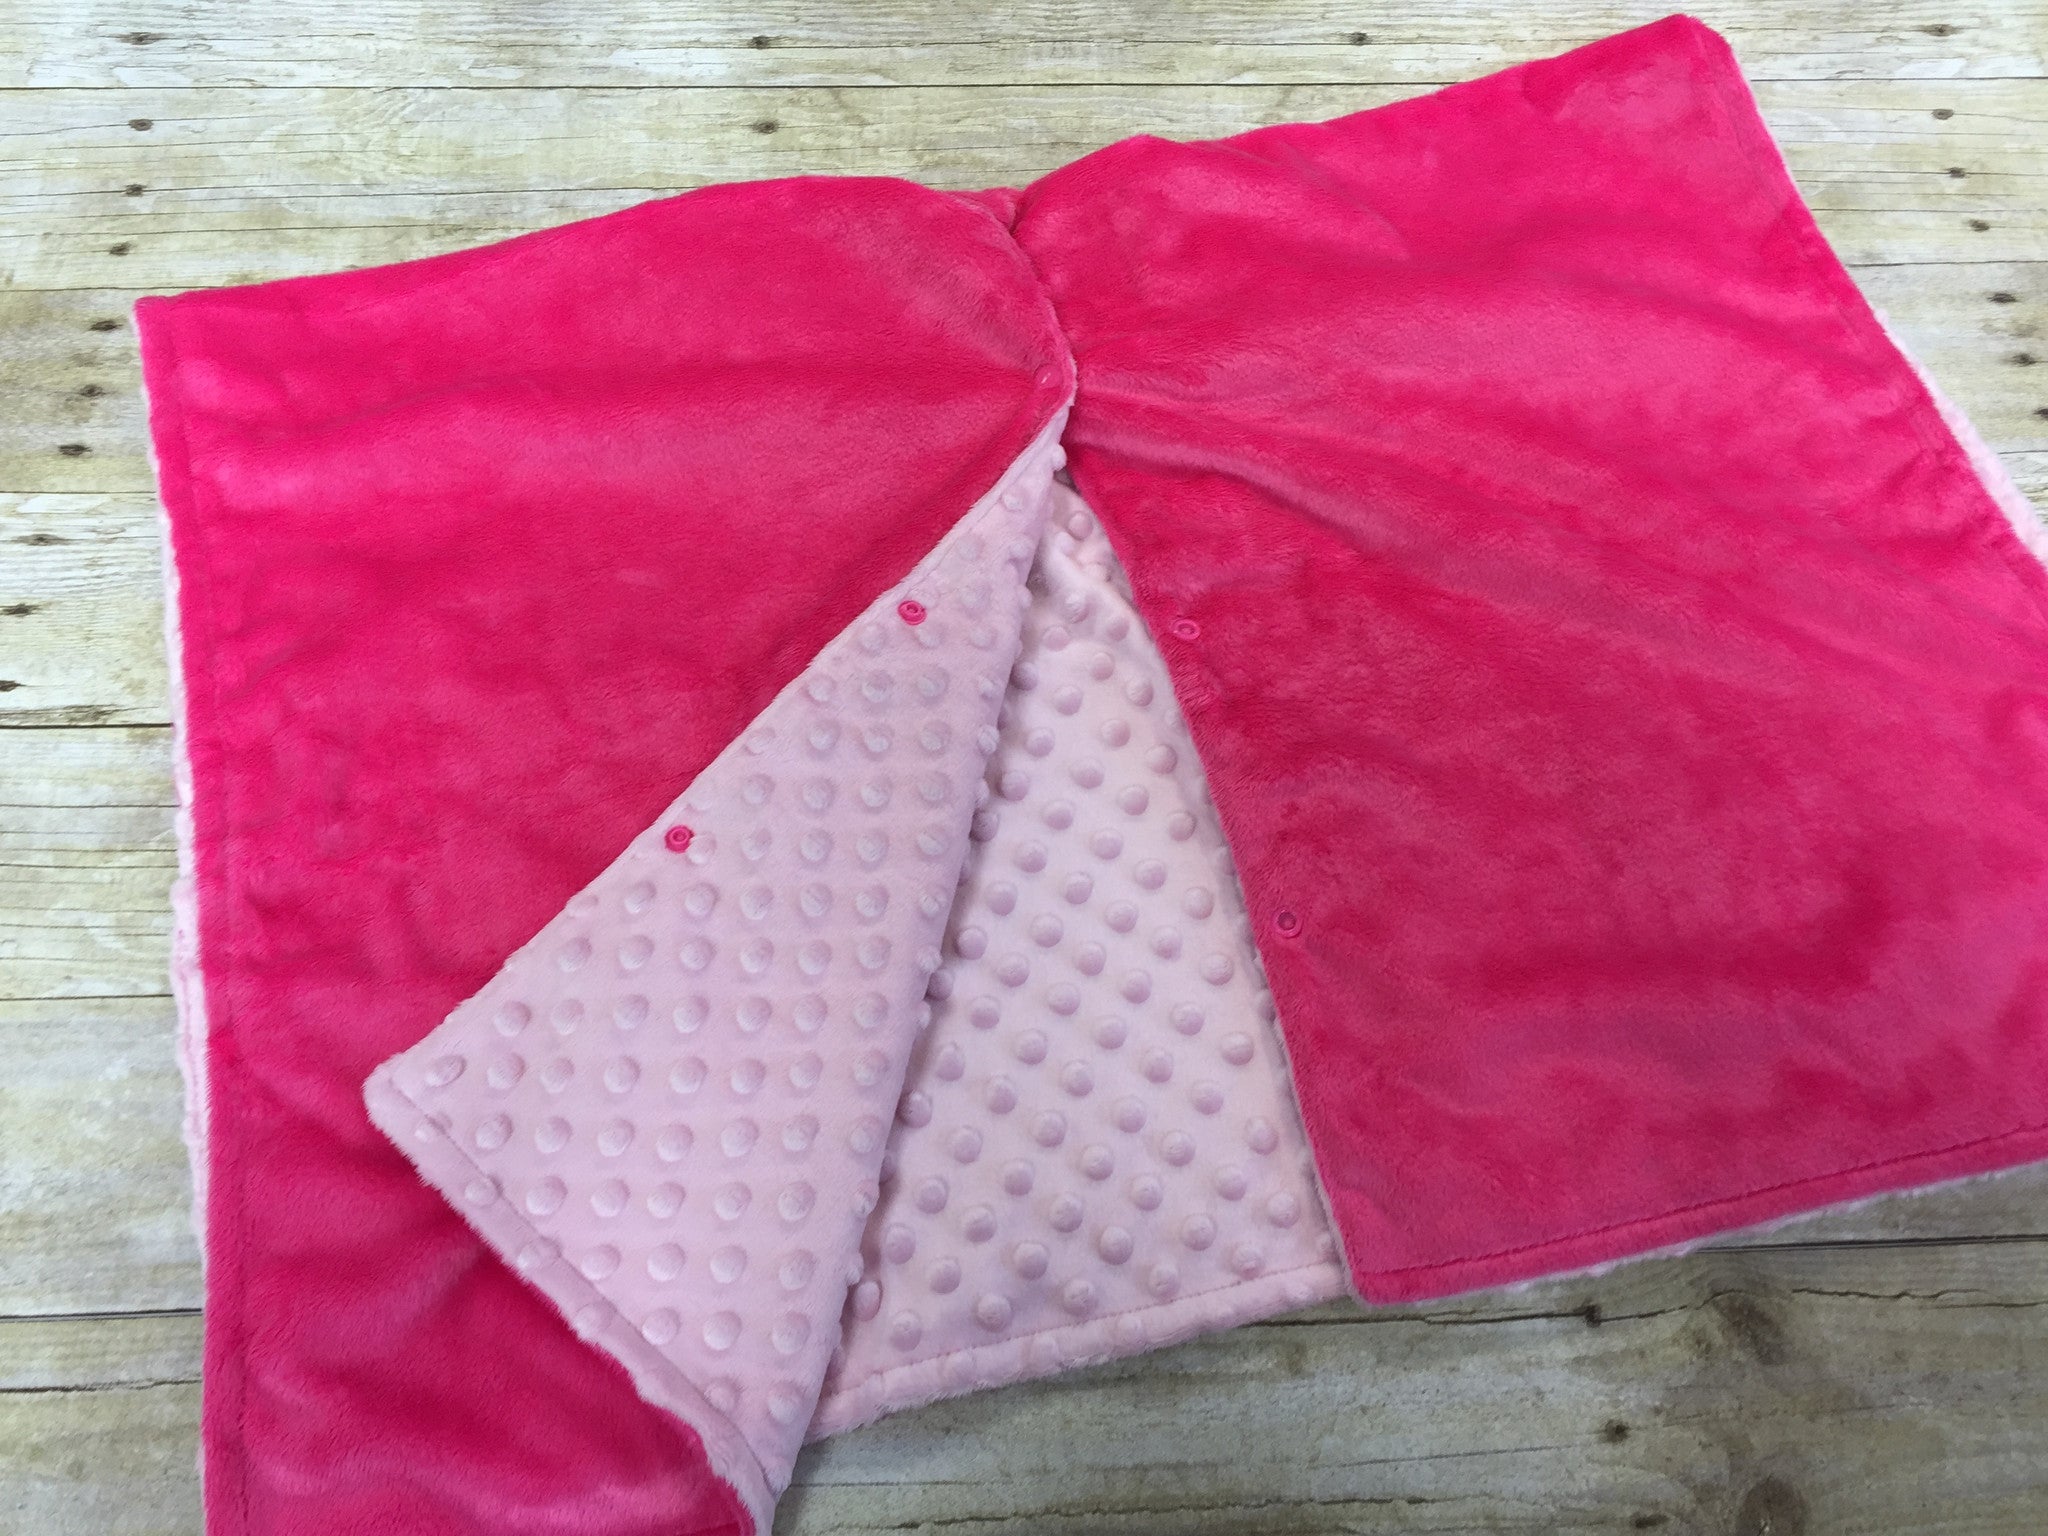 Super soft minky car seat canopy cover - hot pink/light pink can be personalized with baby's name!